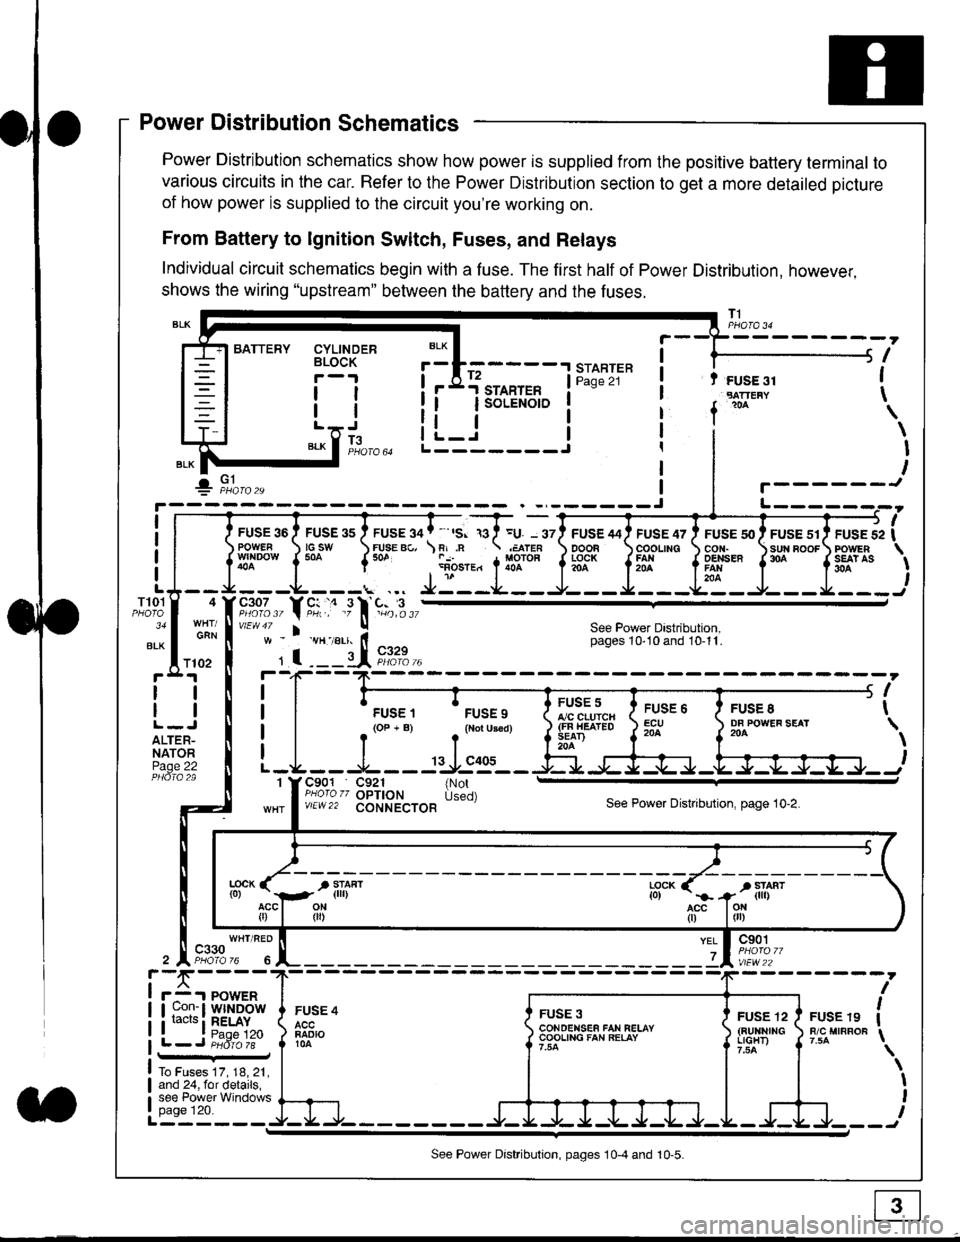 HONDA CIVIC 1996 6.G Owners Manual Power Distribution Schematics
Power Distribution schematics show how power is supplied from the positive battery terminal to
various circuits in the car. Refer to the Power Distribution section to get